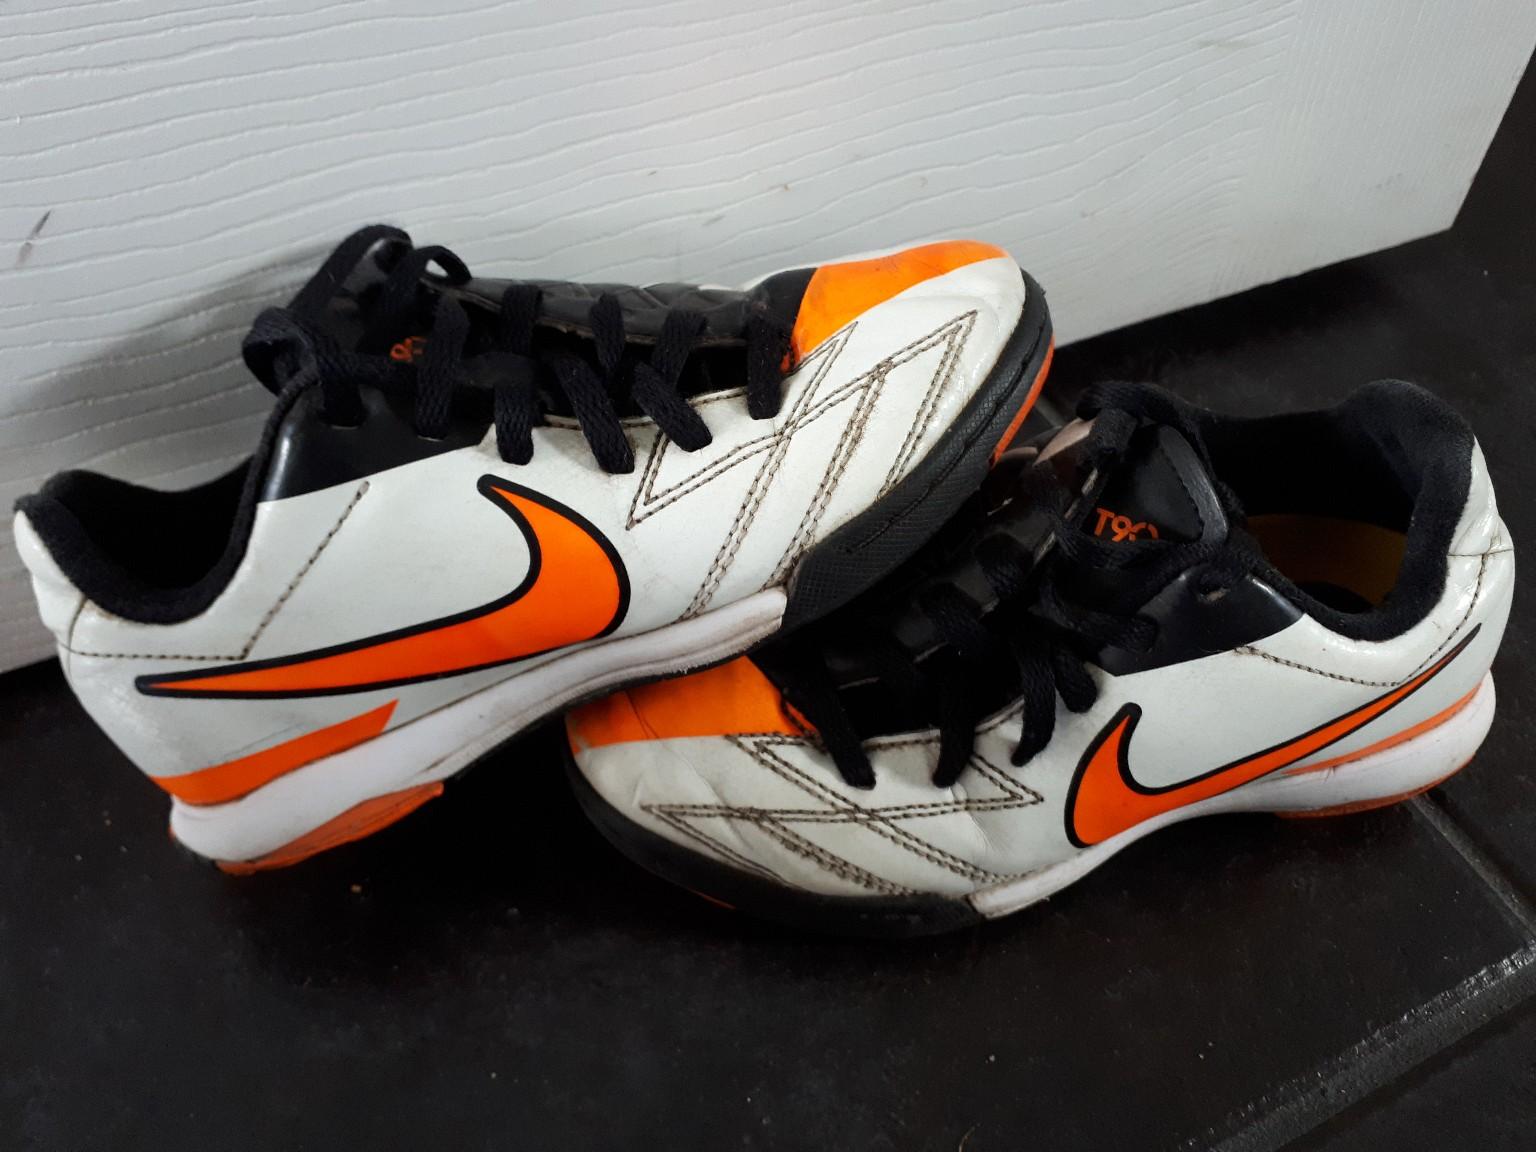 Nike Astros in PE15 March for £3.00 for 